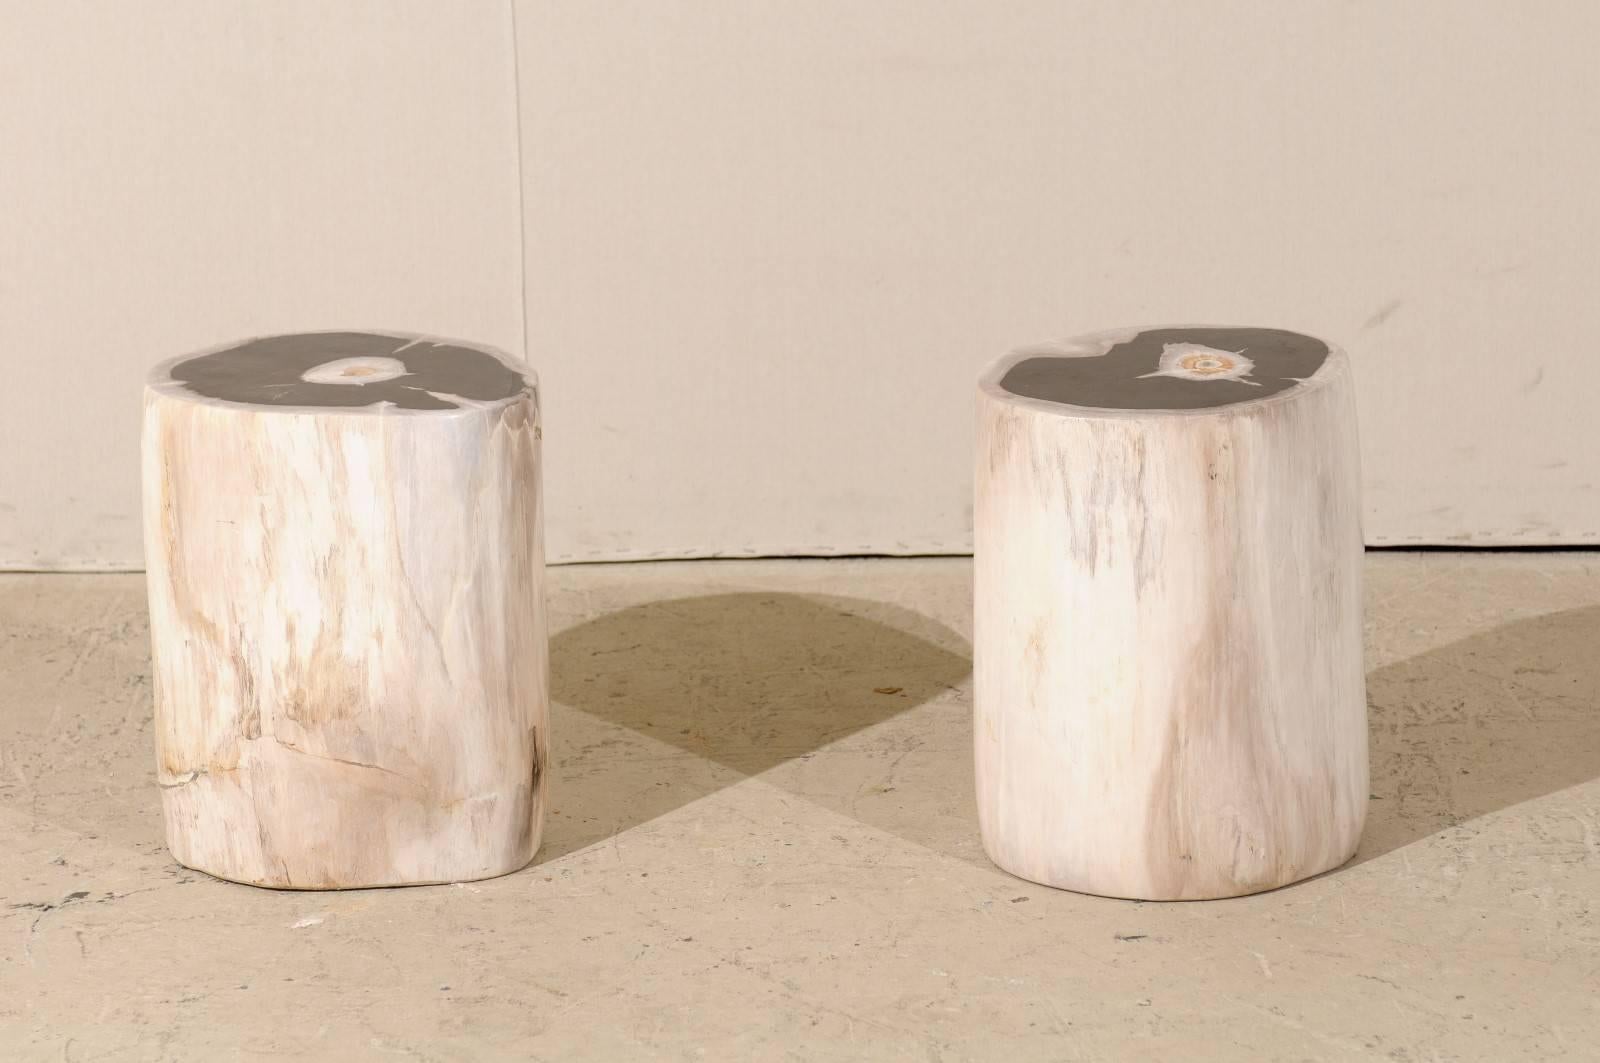 Polished Pair of Sleek Petrified Wood Drink / Side Tables in Cream Color with Black Tops